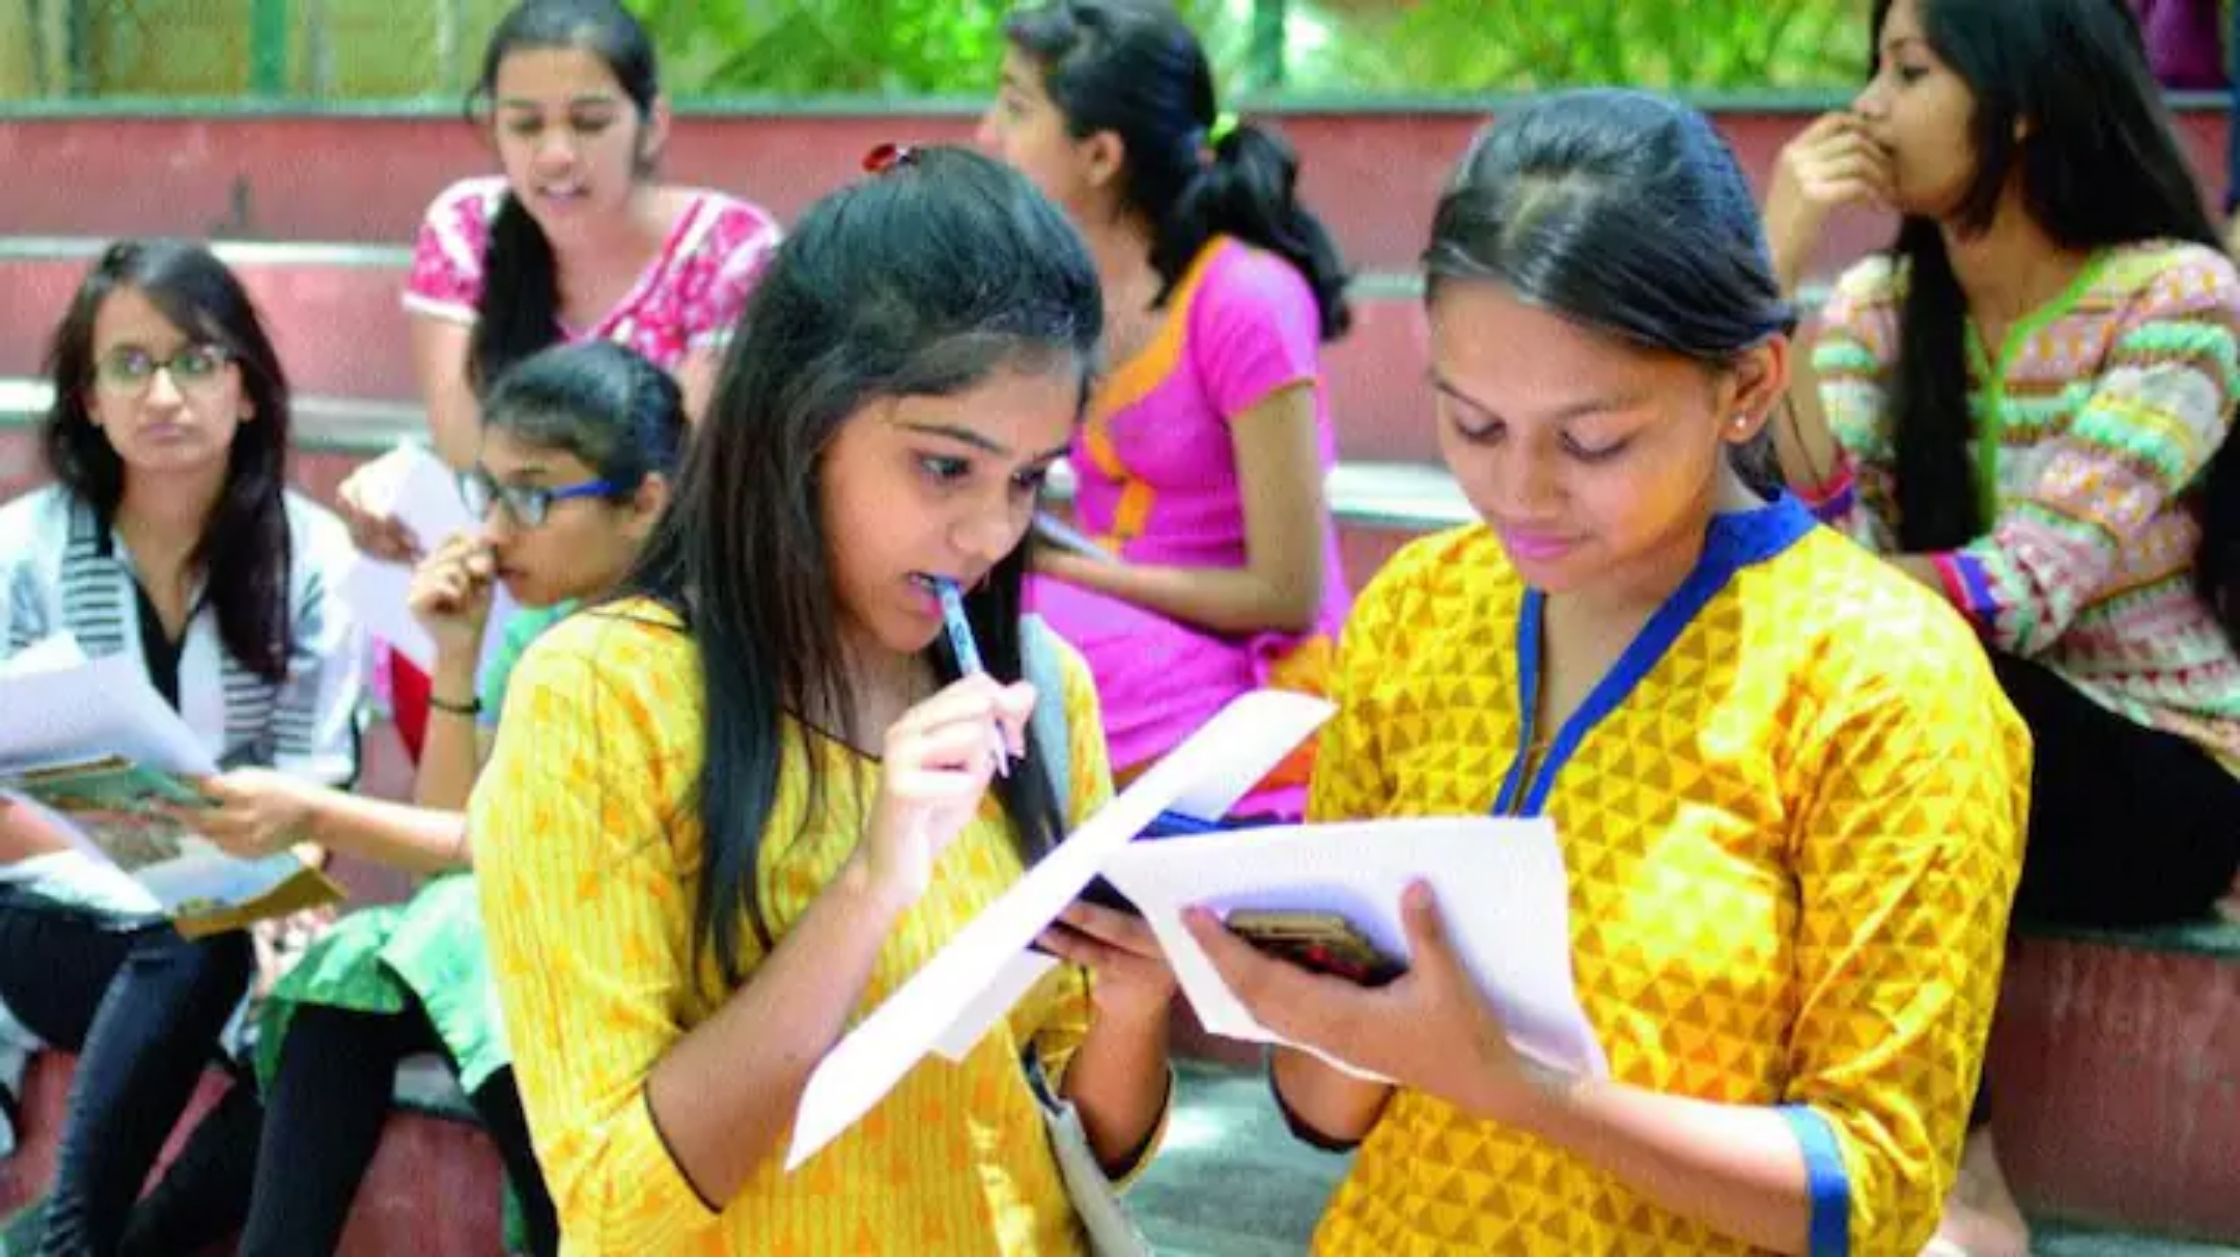 certificates of 150 lakh students stuck due to server glitch